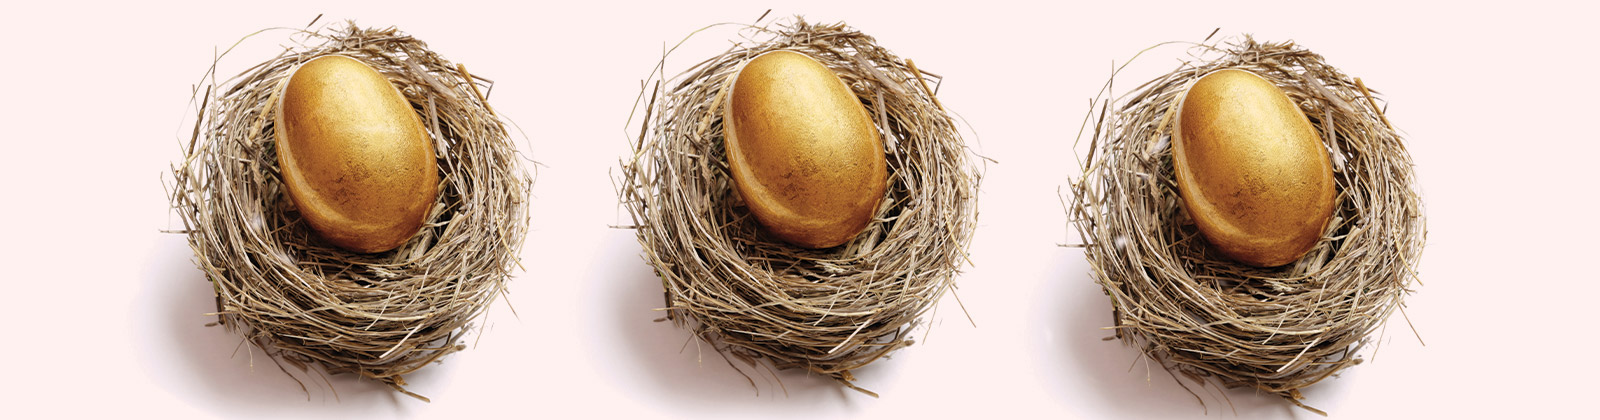 Nest with Gold Eggs